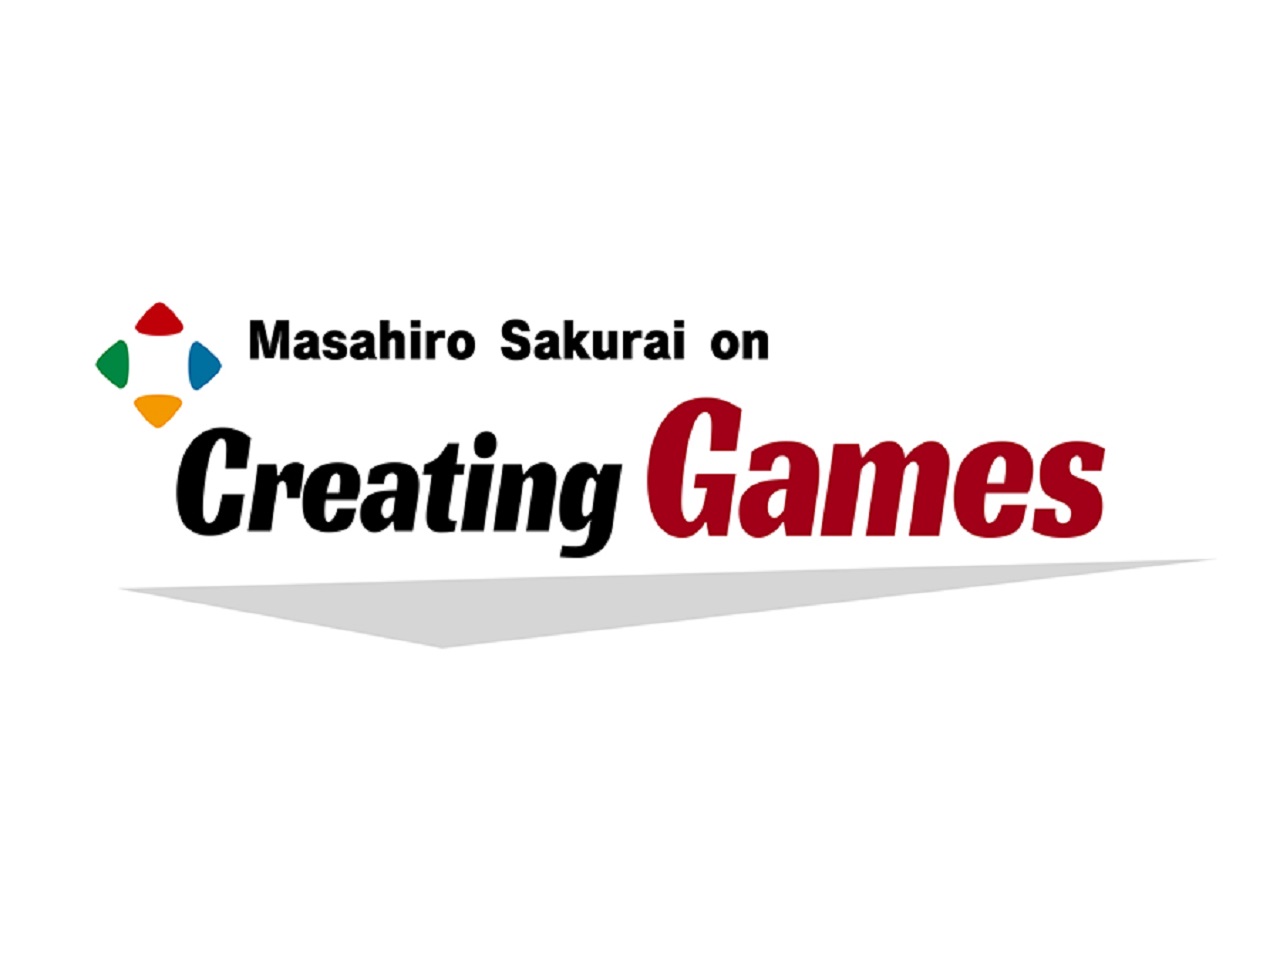 Masahiro Sakurai launches a YouTube channel with the goal of making games more fun